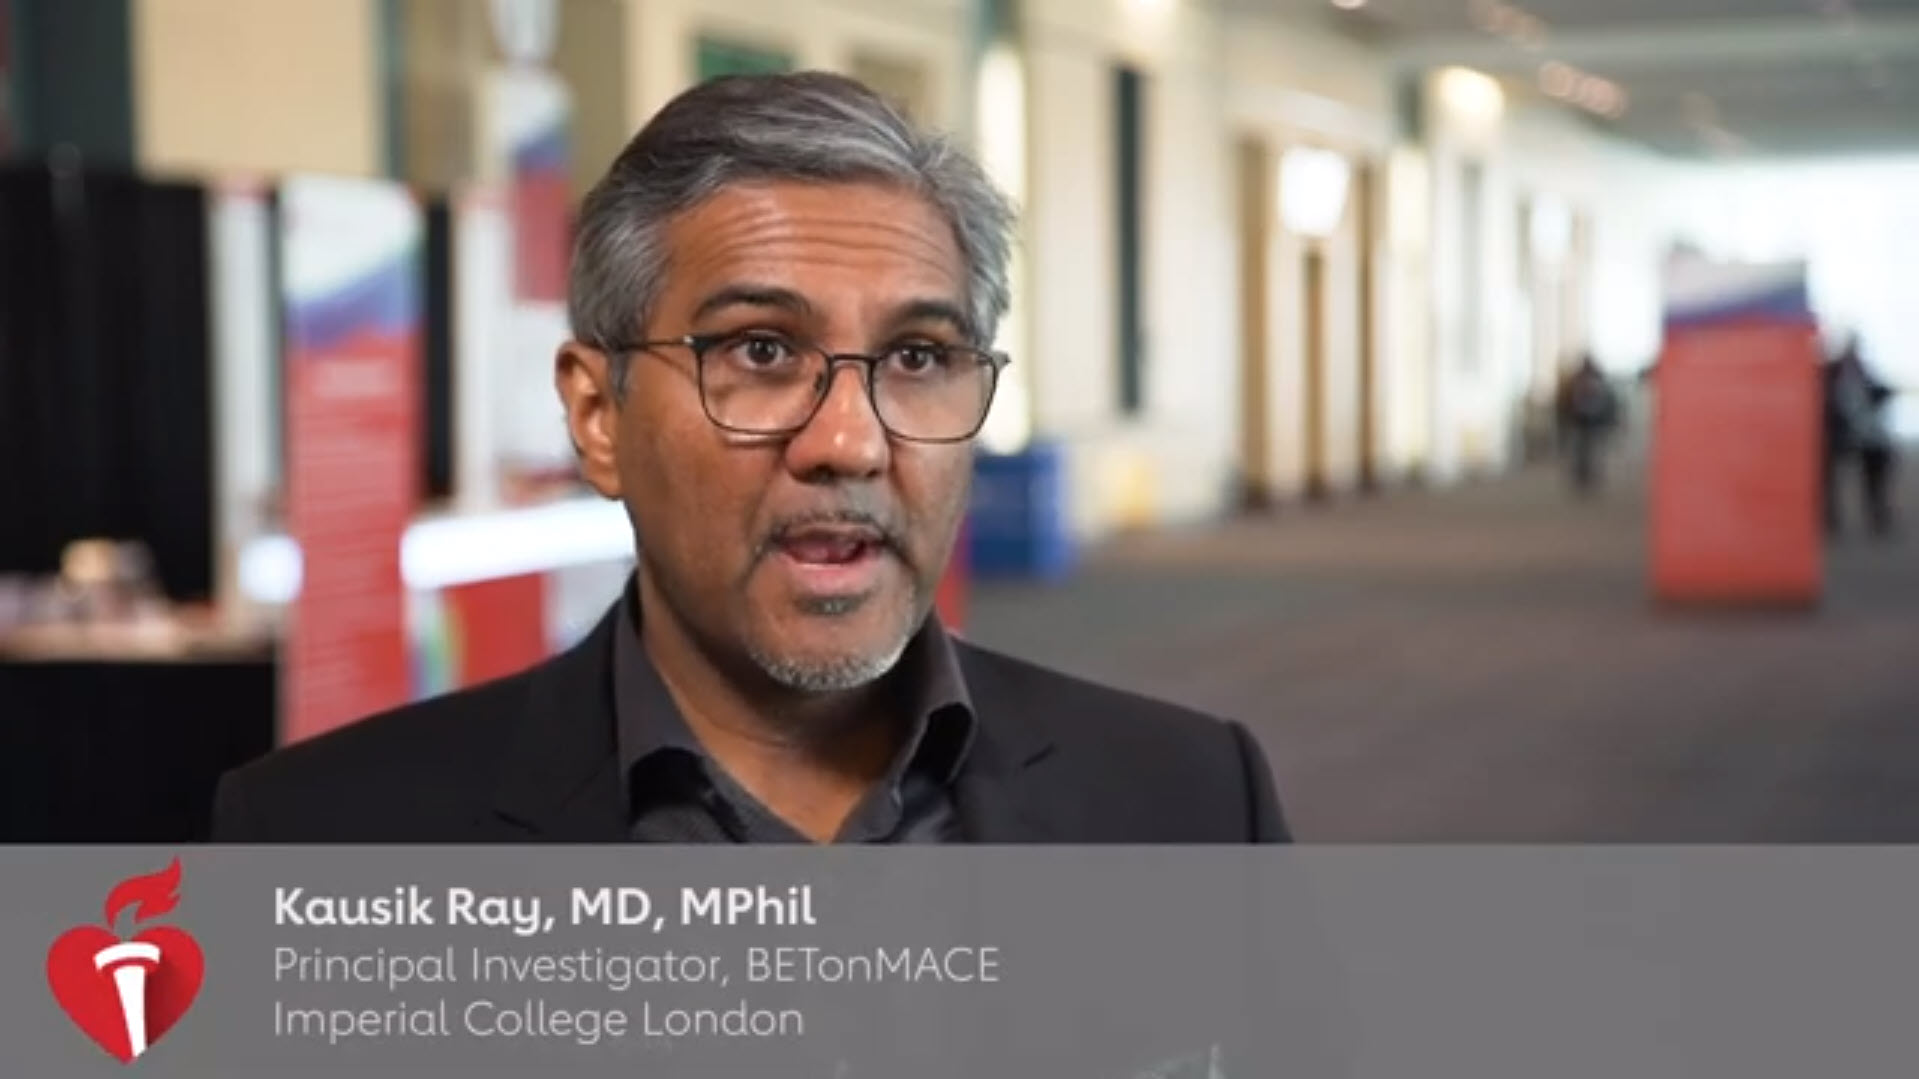 Kausik Ray discusses Results of BETonMACE